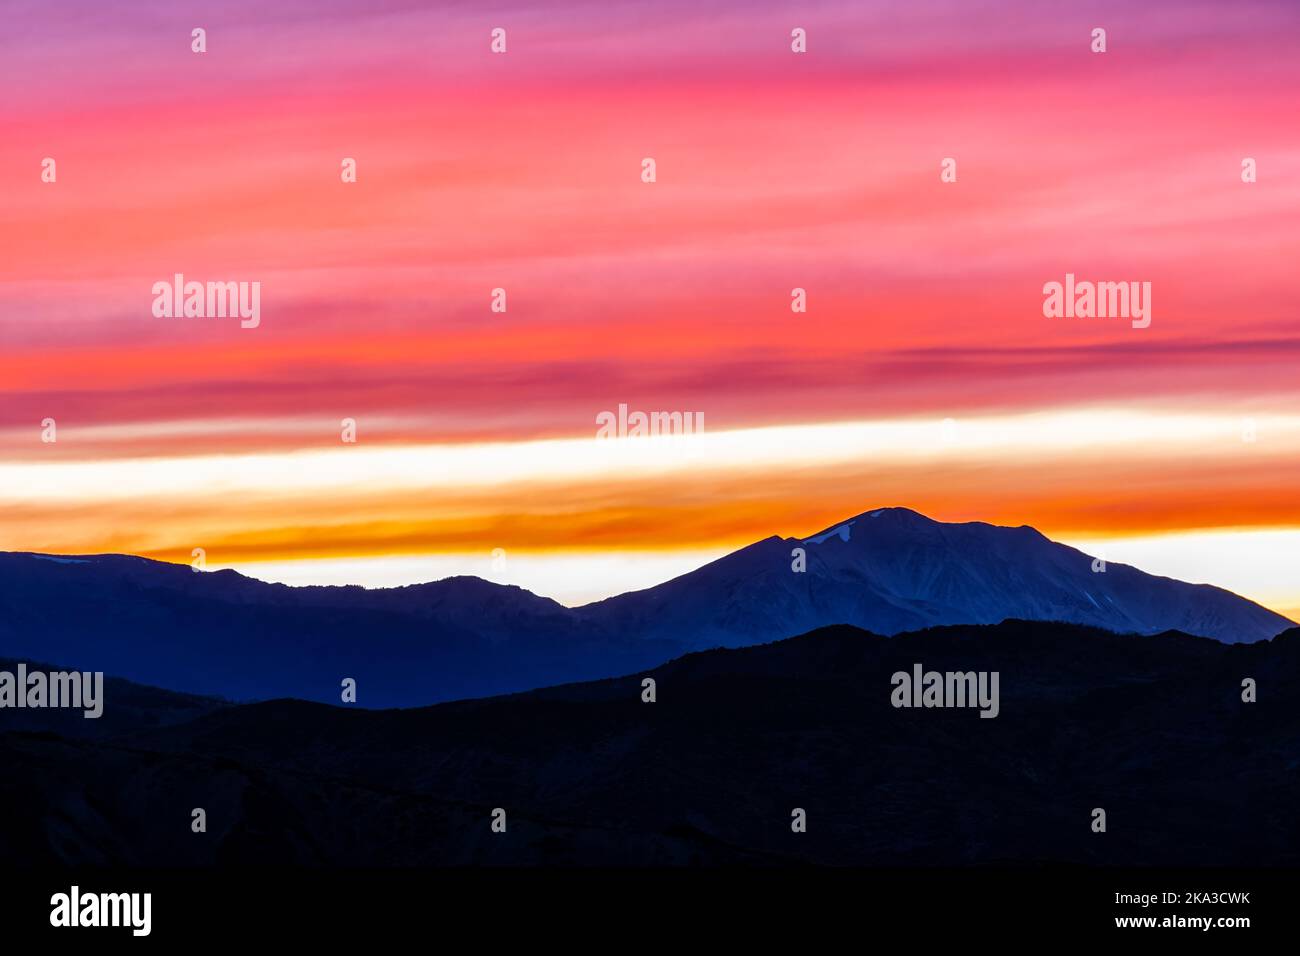 Orange red pink cloudy sunset in Aspen, Colorado with Rocky mountains peak range, vibrant color of clouds at twilight with mountain ridge silhouette Stock Photo